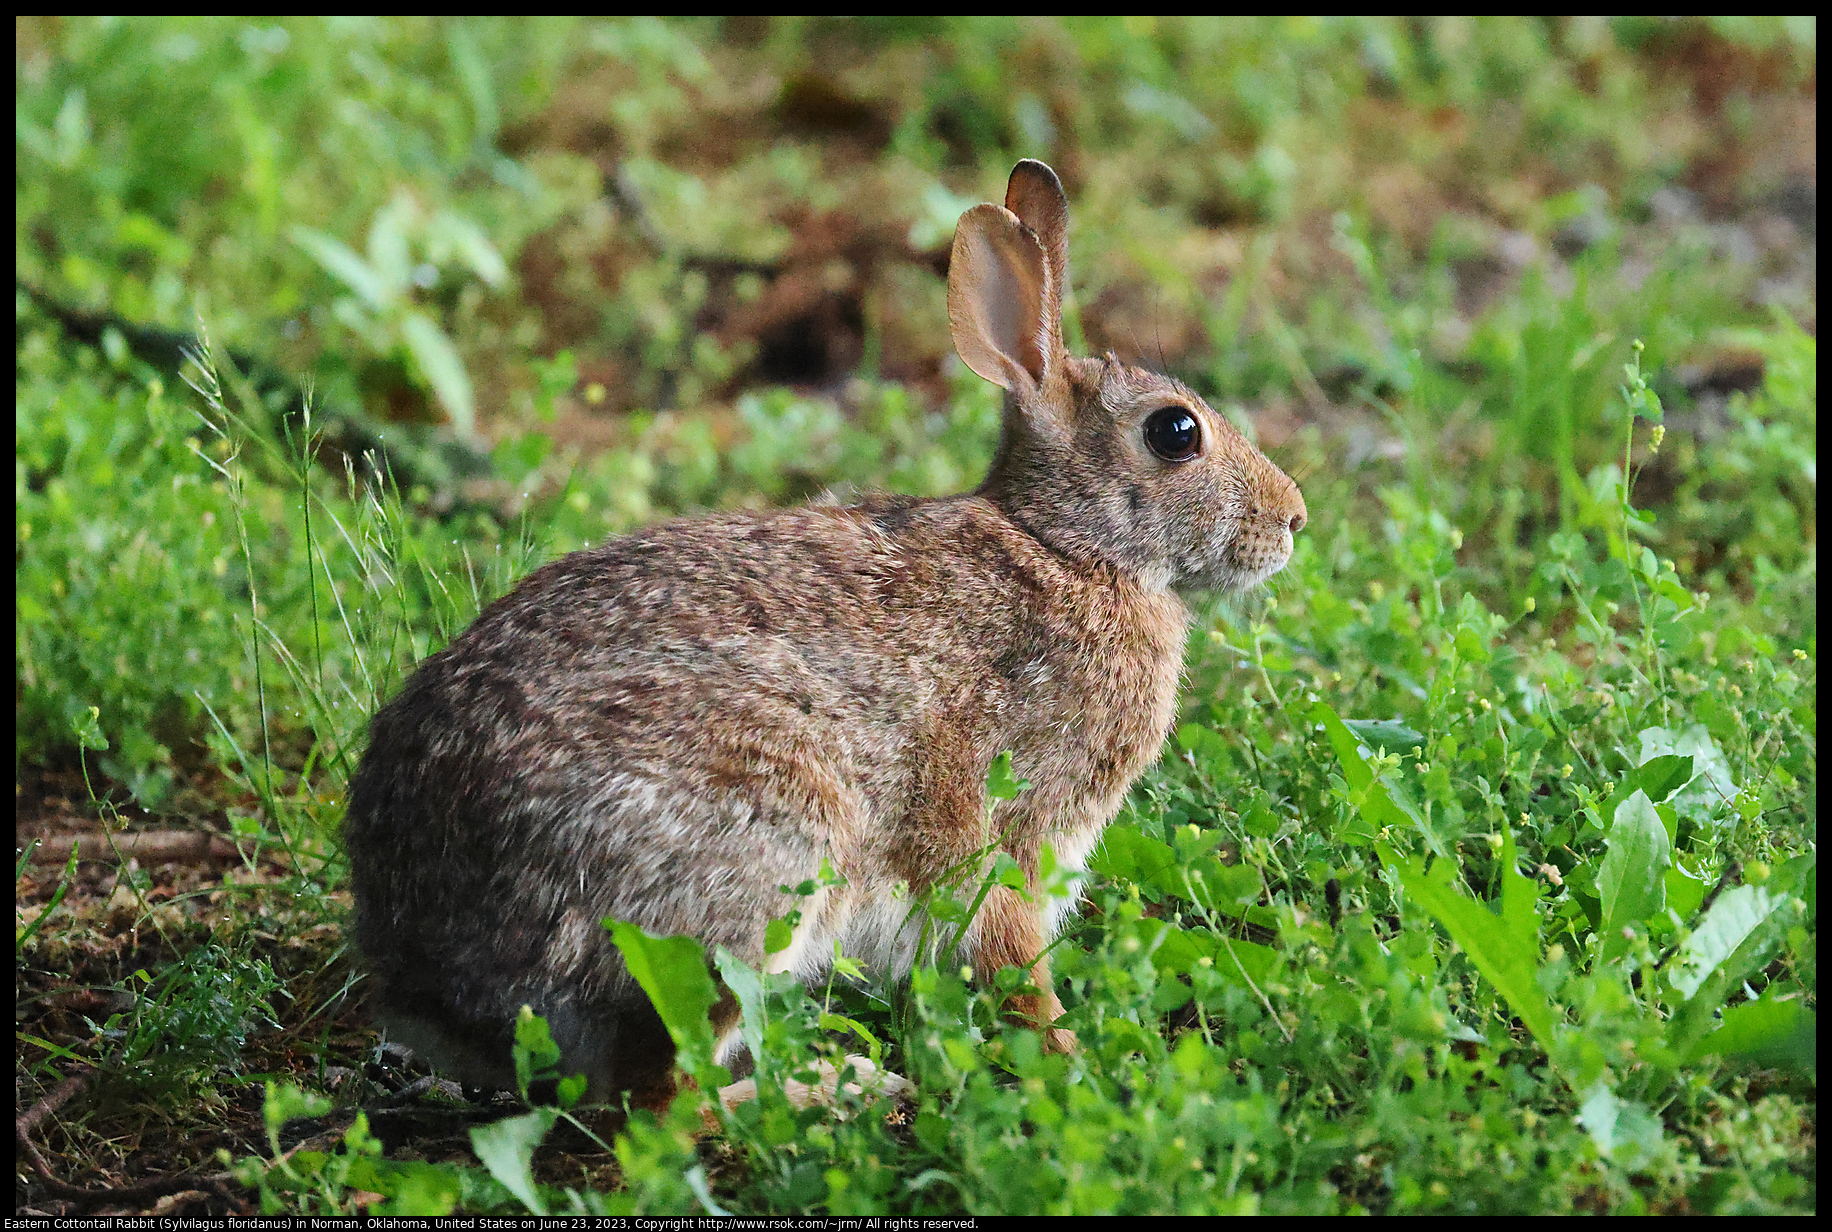 Eastern Cottontail Rabbit (Sylvilagus floridanus) in Norman, Oklahoma, United States on June 23, 2023